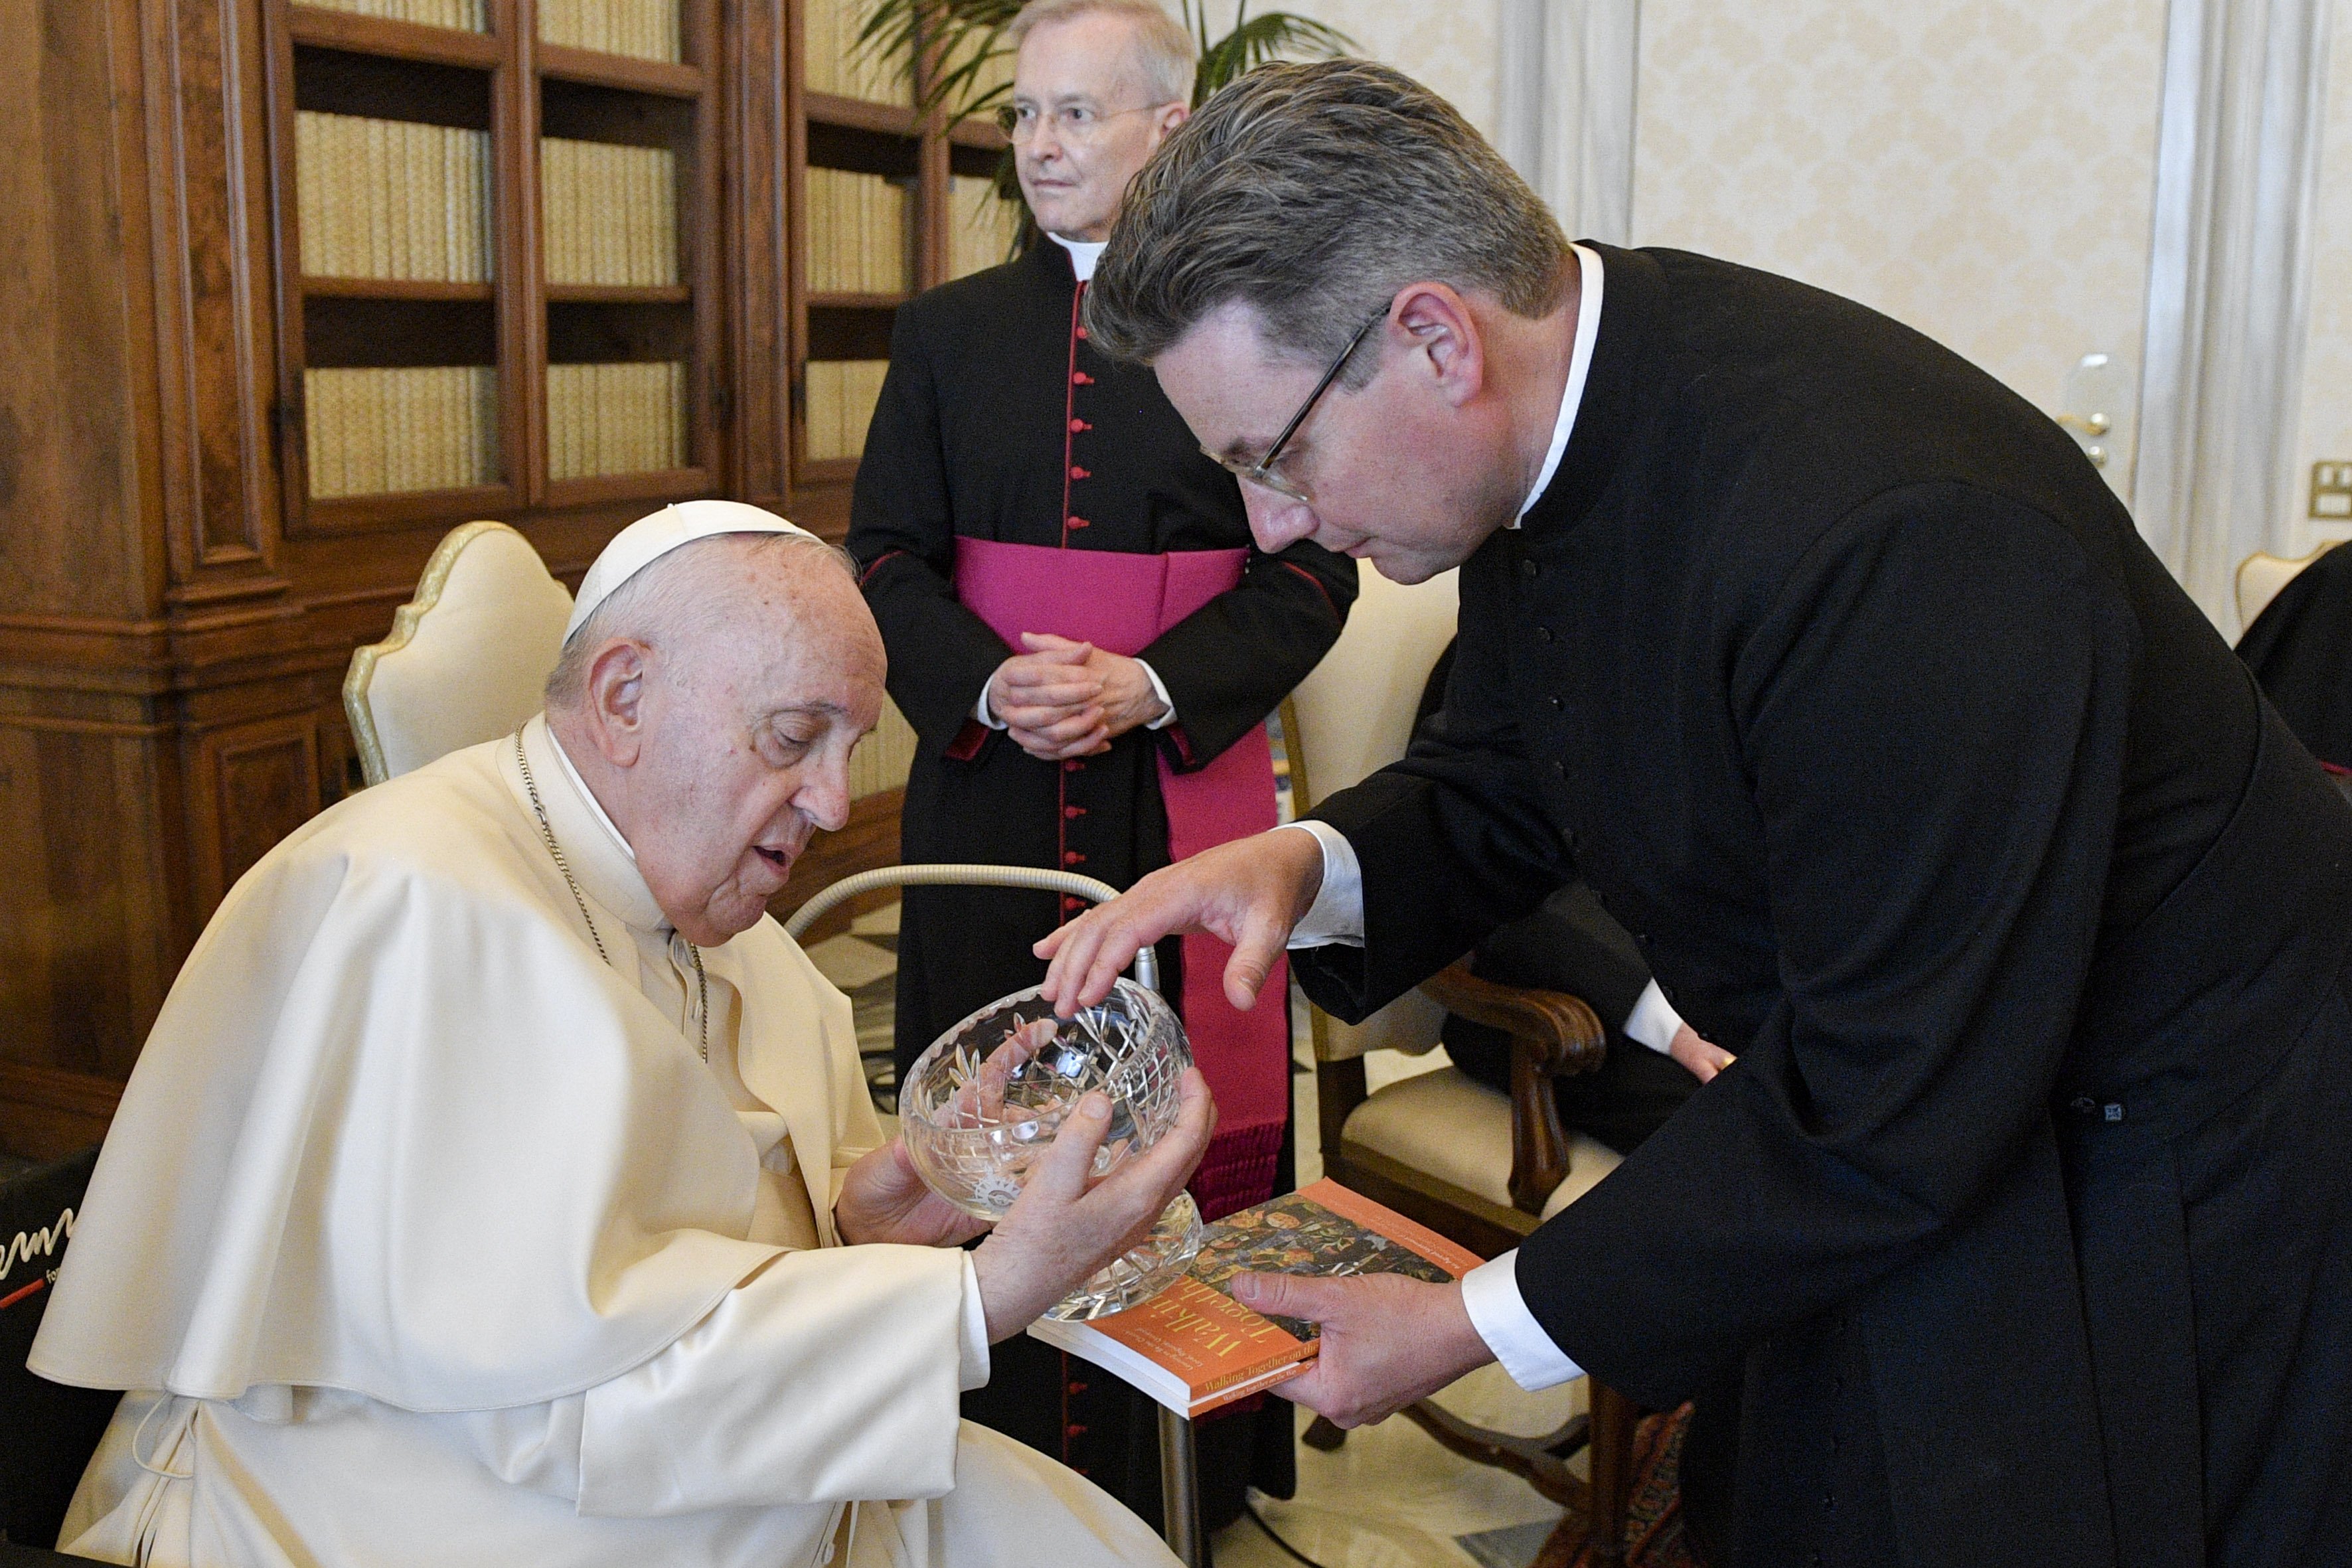 The Rev. Will Adam, deputy secretary-general of the Anglican Communion, presents a gift to Pope Francis during a meeting May 13, 2022. (CNS photo/Vatican Media)